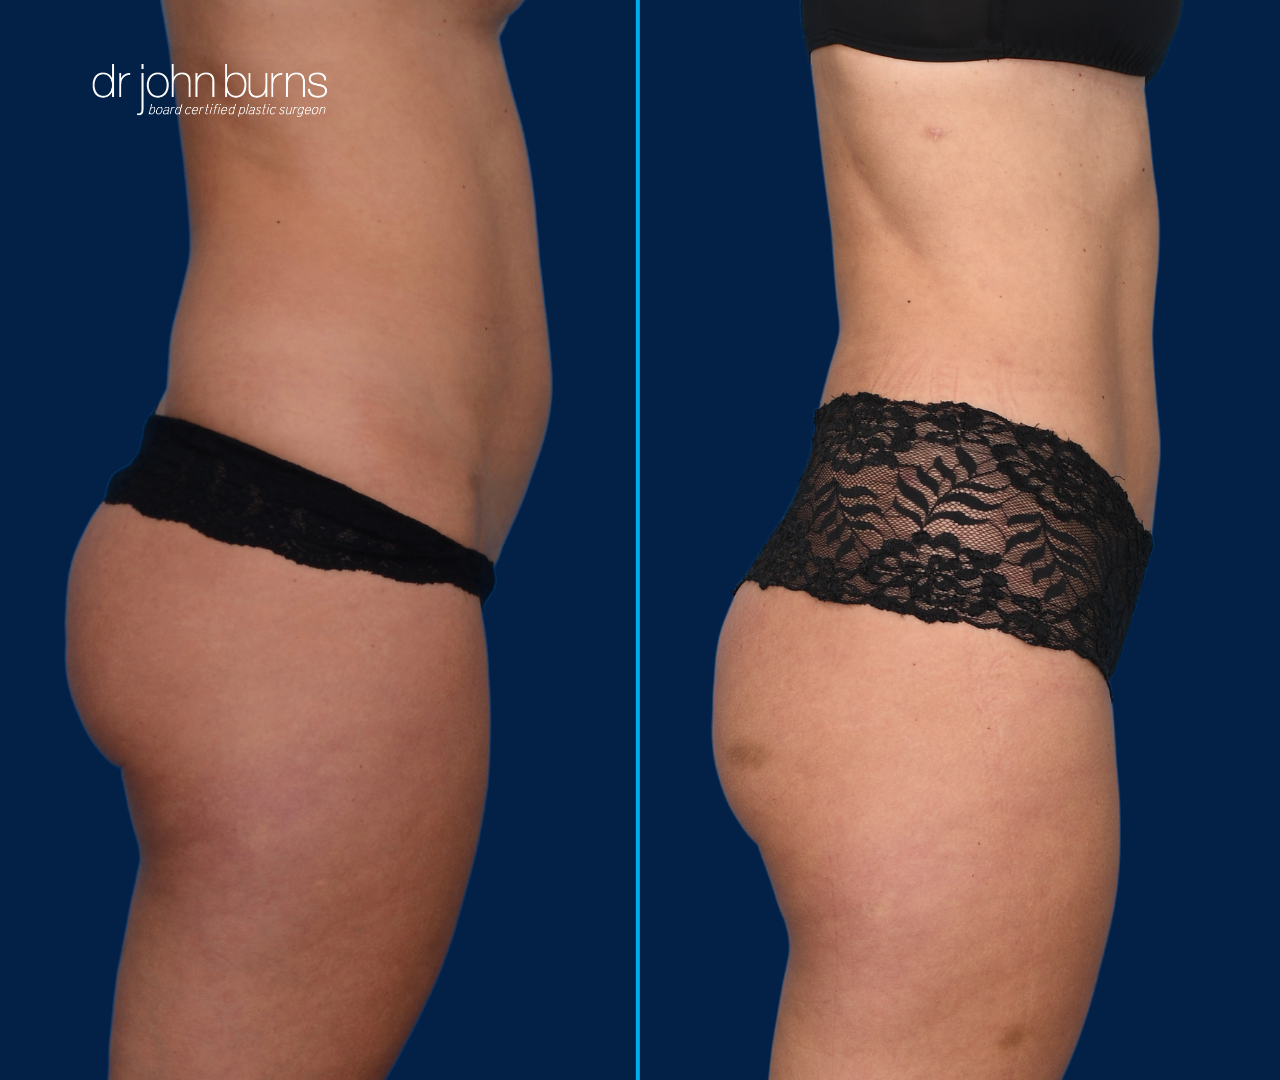 Profile View | Before & After Mini Tummy Tuck with Abdominal Etching by Dallas Plastic Surgeon, Dr. John Burns